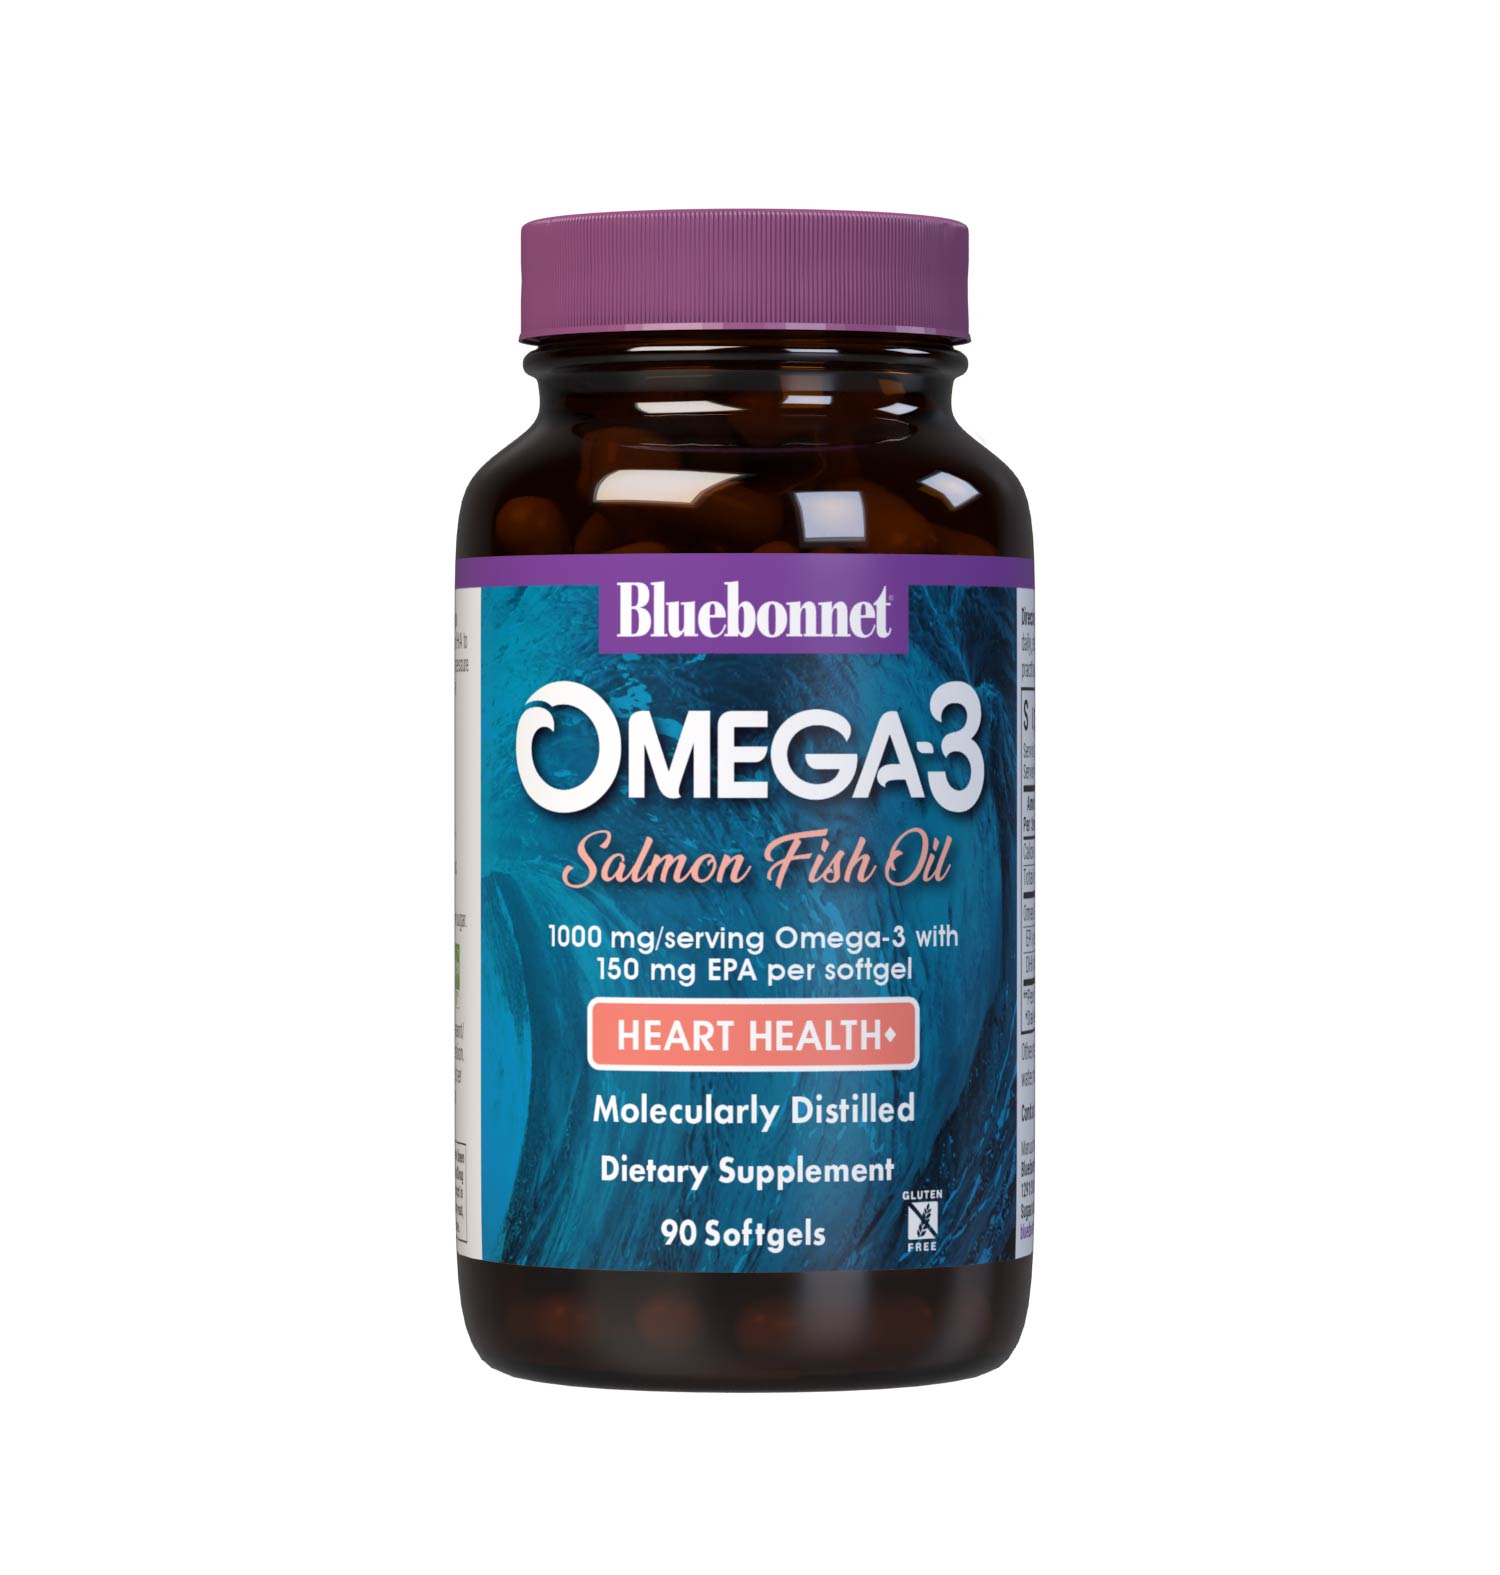 Bluebonnet’s Omega-3 Salmon Oil 90 Softgels are formulated with a specific ratio of EPA and DHA to help support heart health, blood flow, and blood pressure within the normal range by utilizing ultra-refined omega 3-s from salmon fish oil. #size_90 count